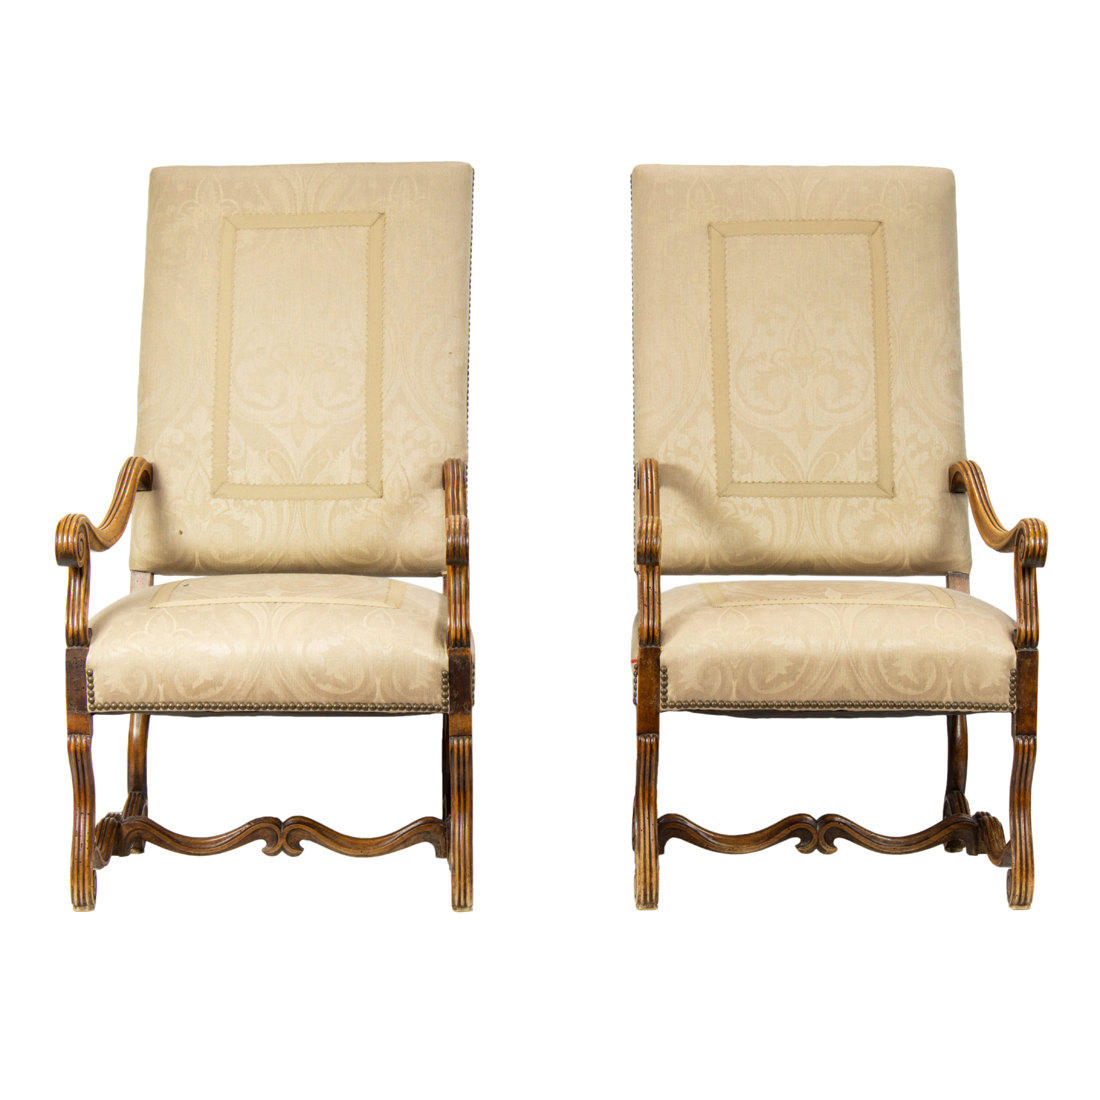 A PAIR OF FRENCH LOUIS XIV STYLE